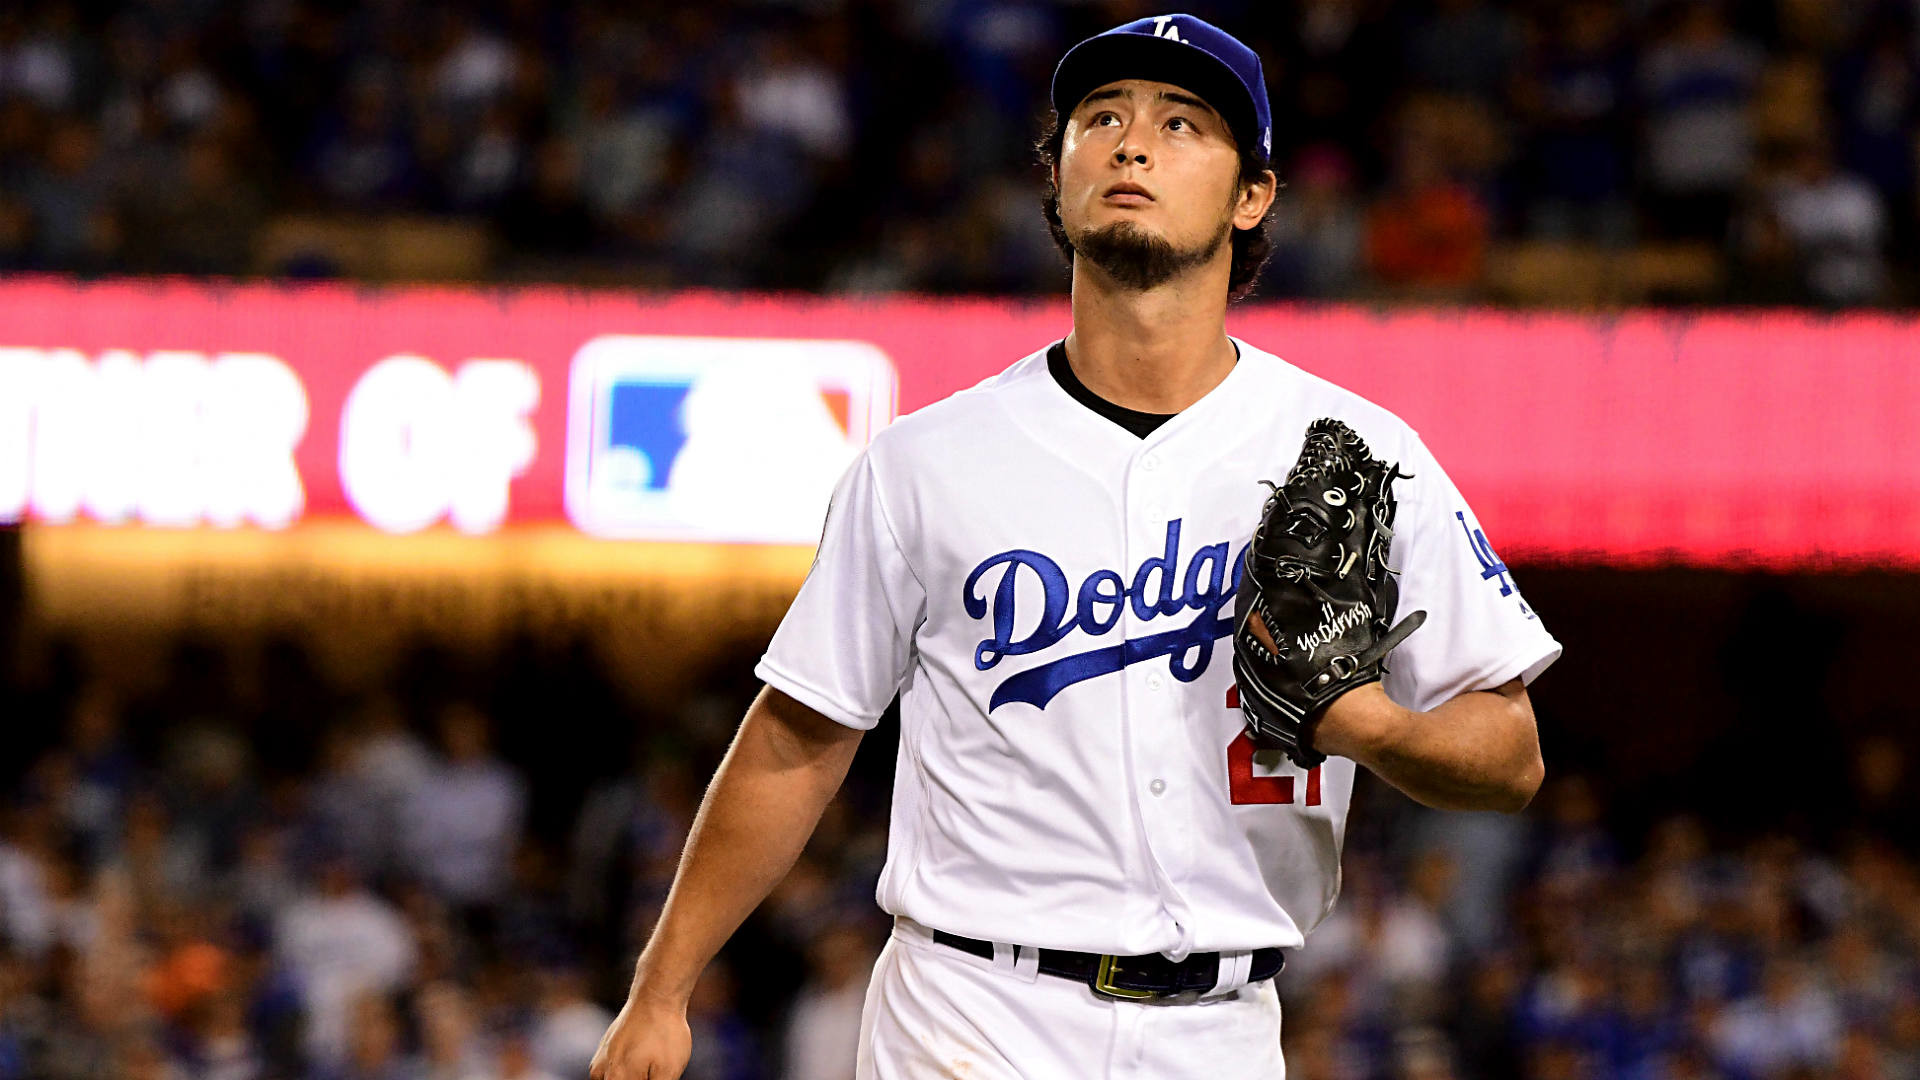 1920x1080 World Series 2017: Yu Darvish couldn't find redemption as Dodgers fans  hoped for revenge | MLB | Sporting News